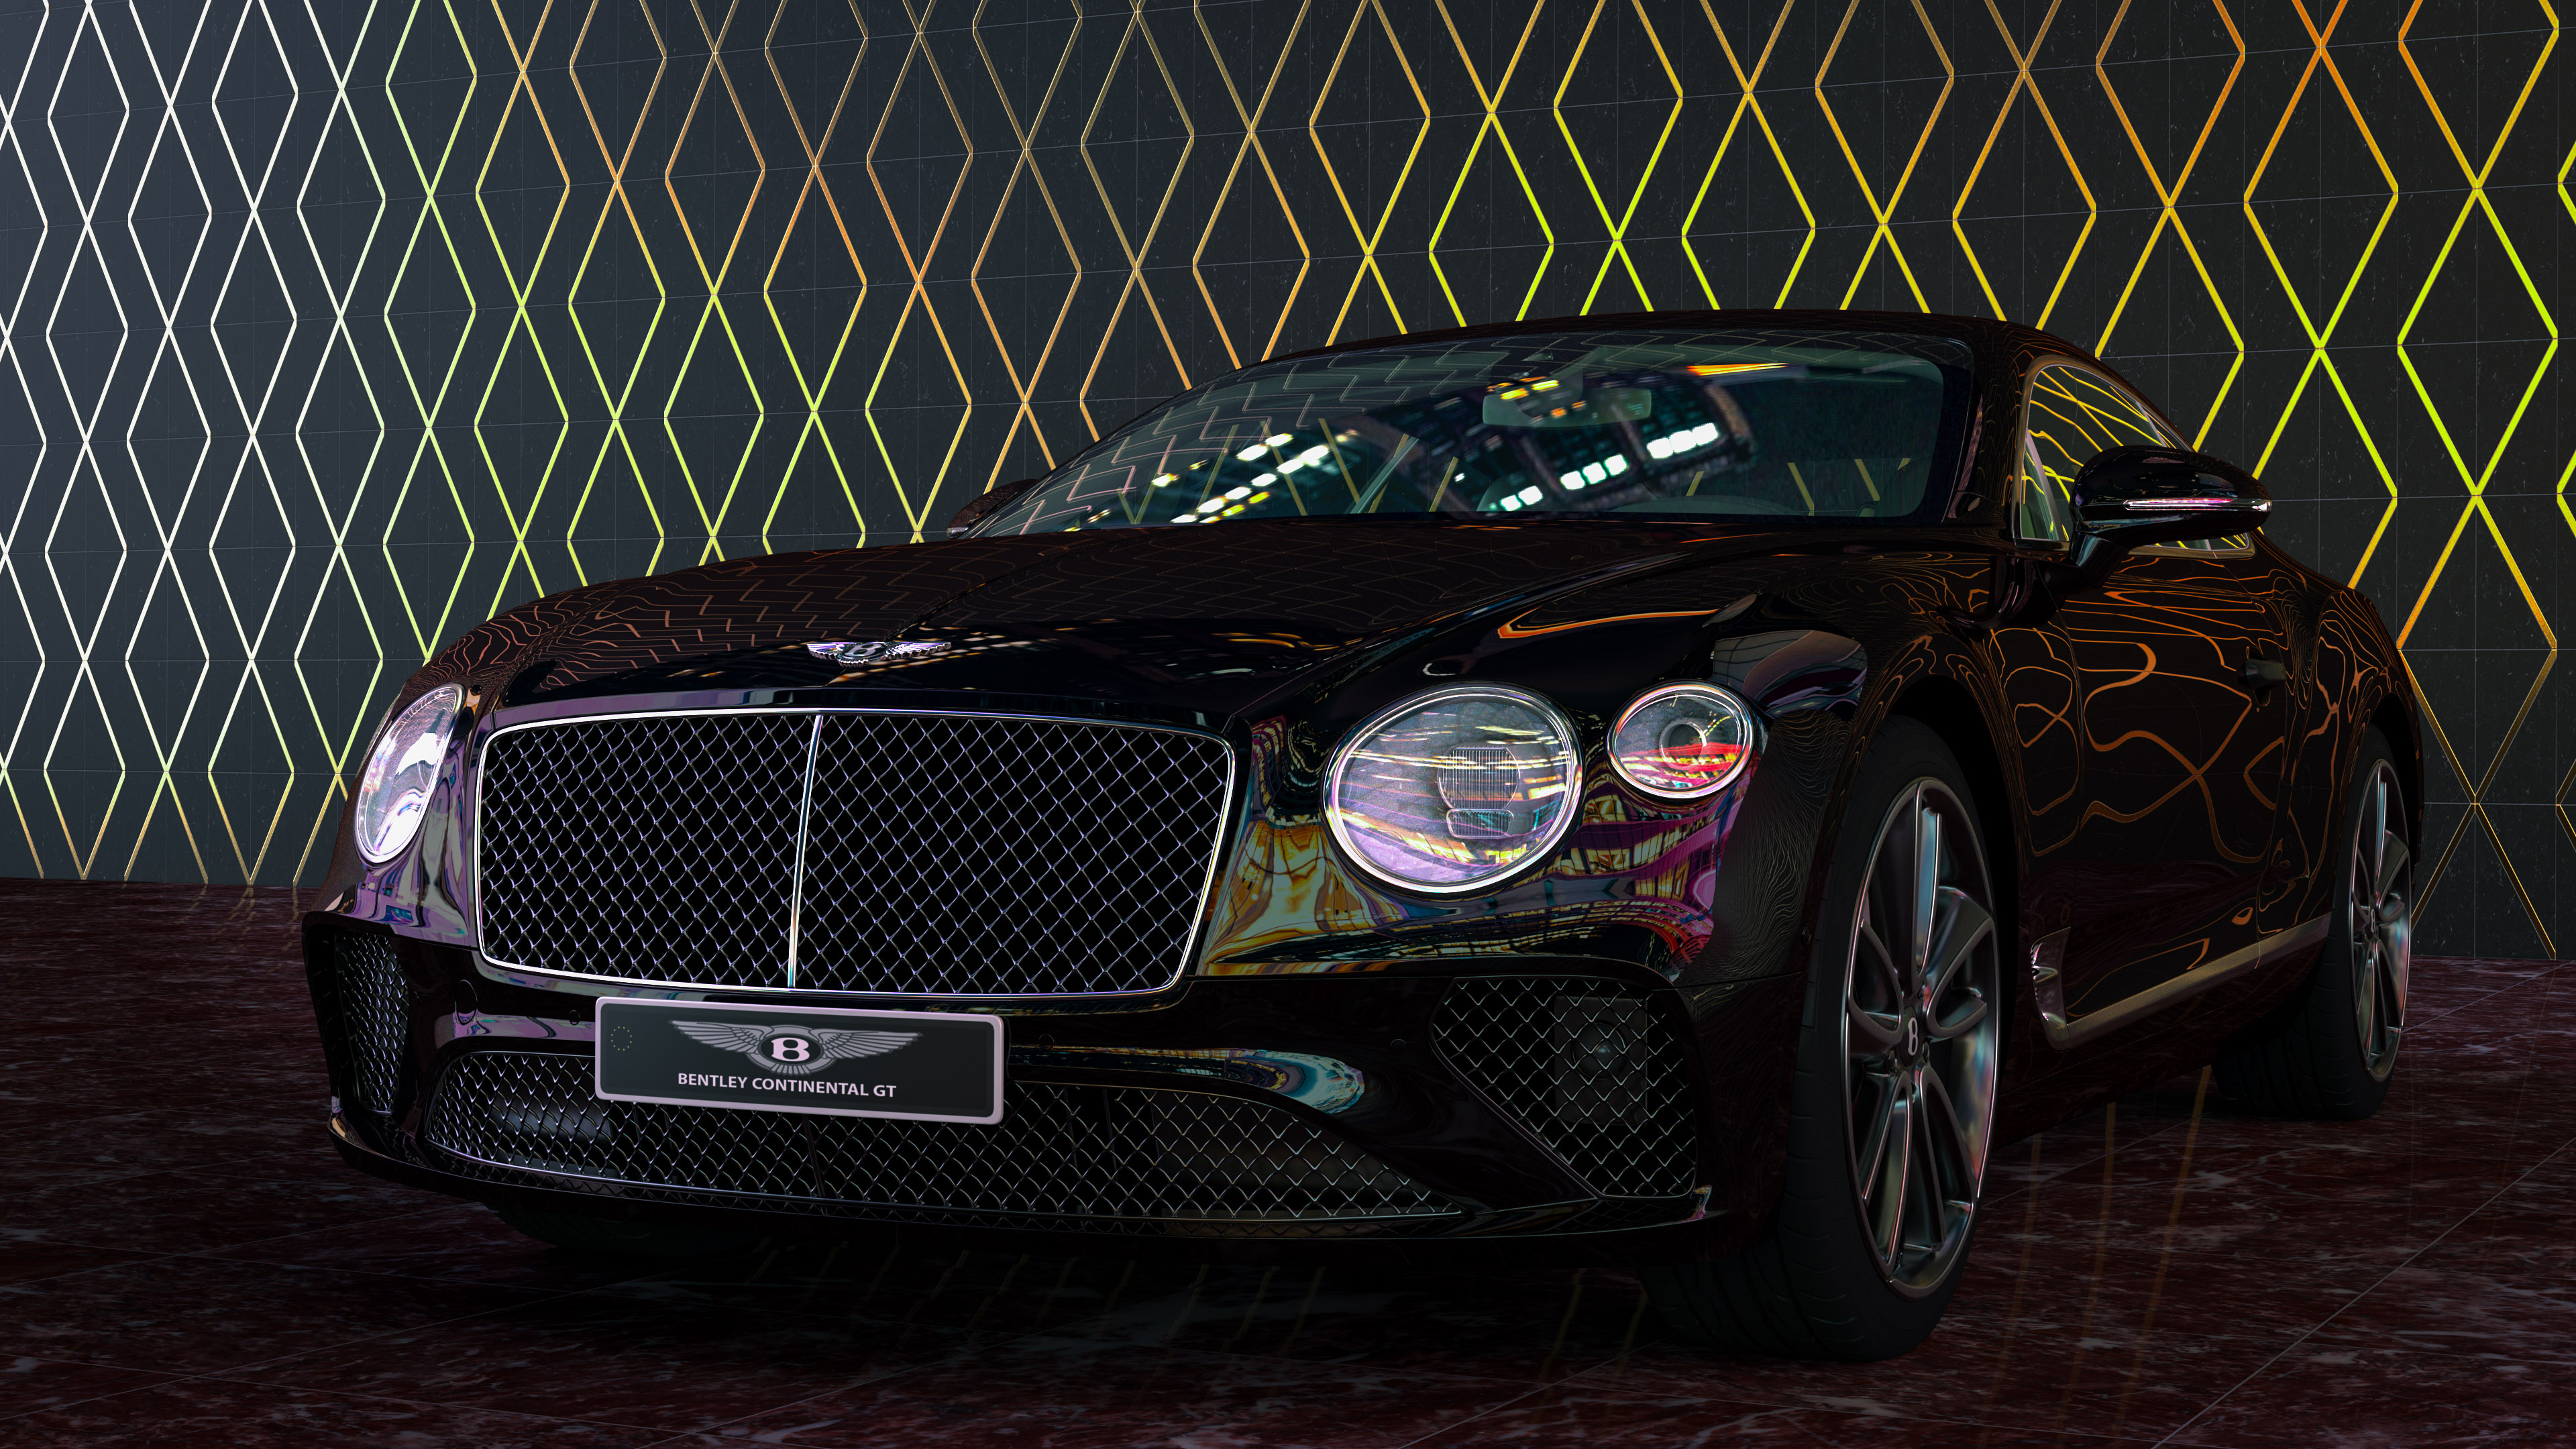 Enjoy the beauty and style of Bentley Continental with the best car wallpaper 4K, perfect for transforming your PC.